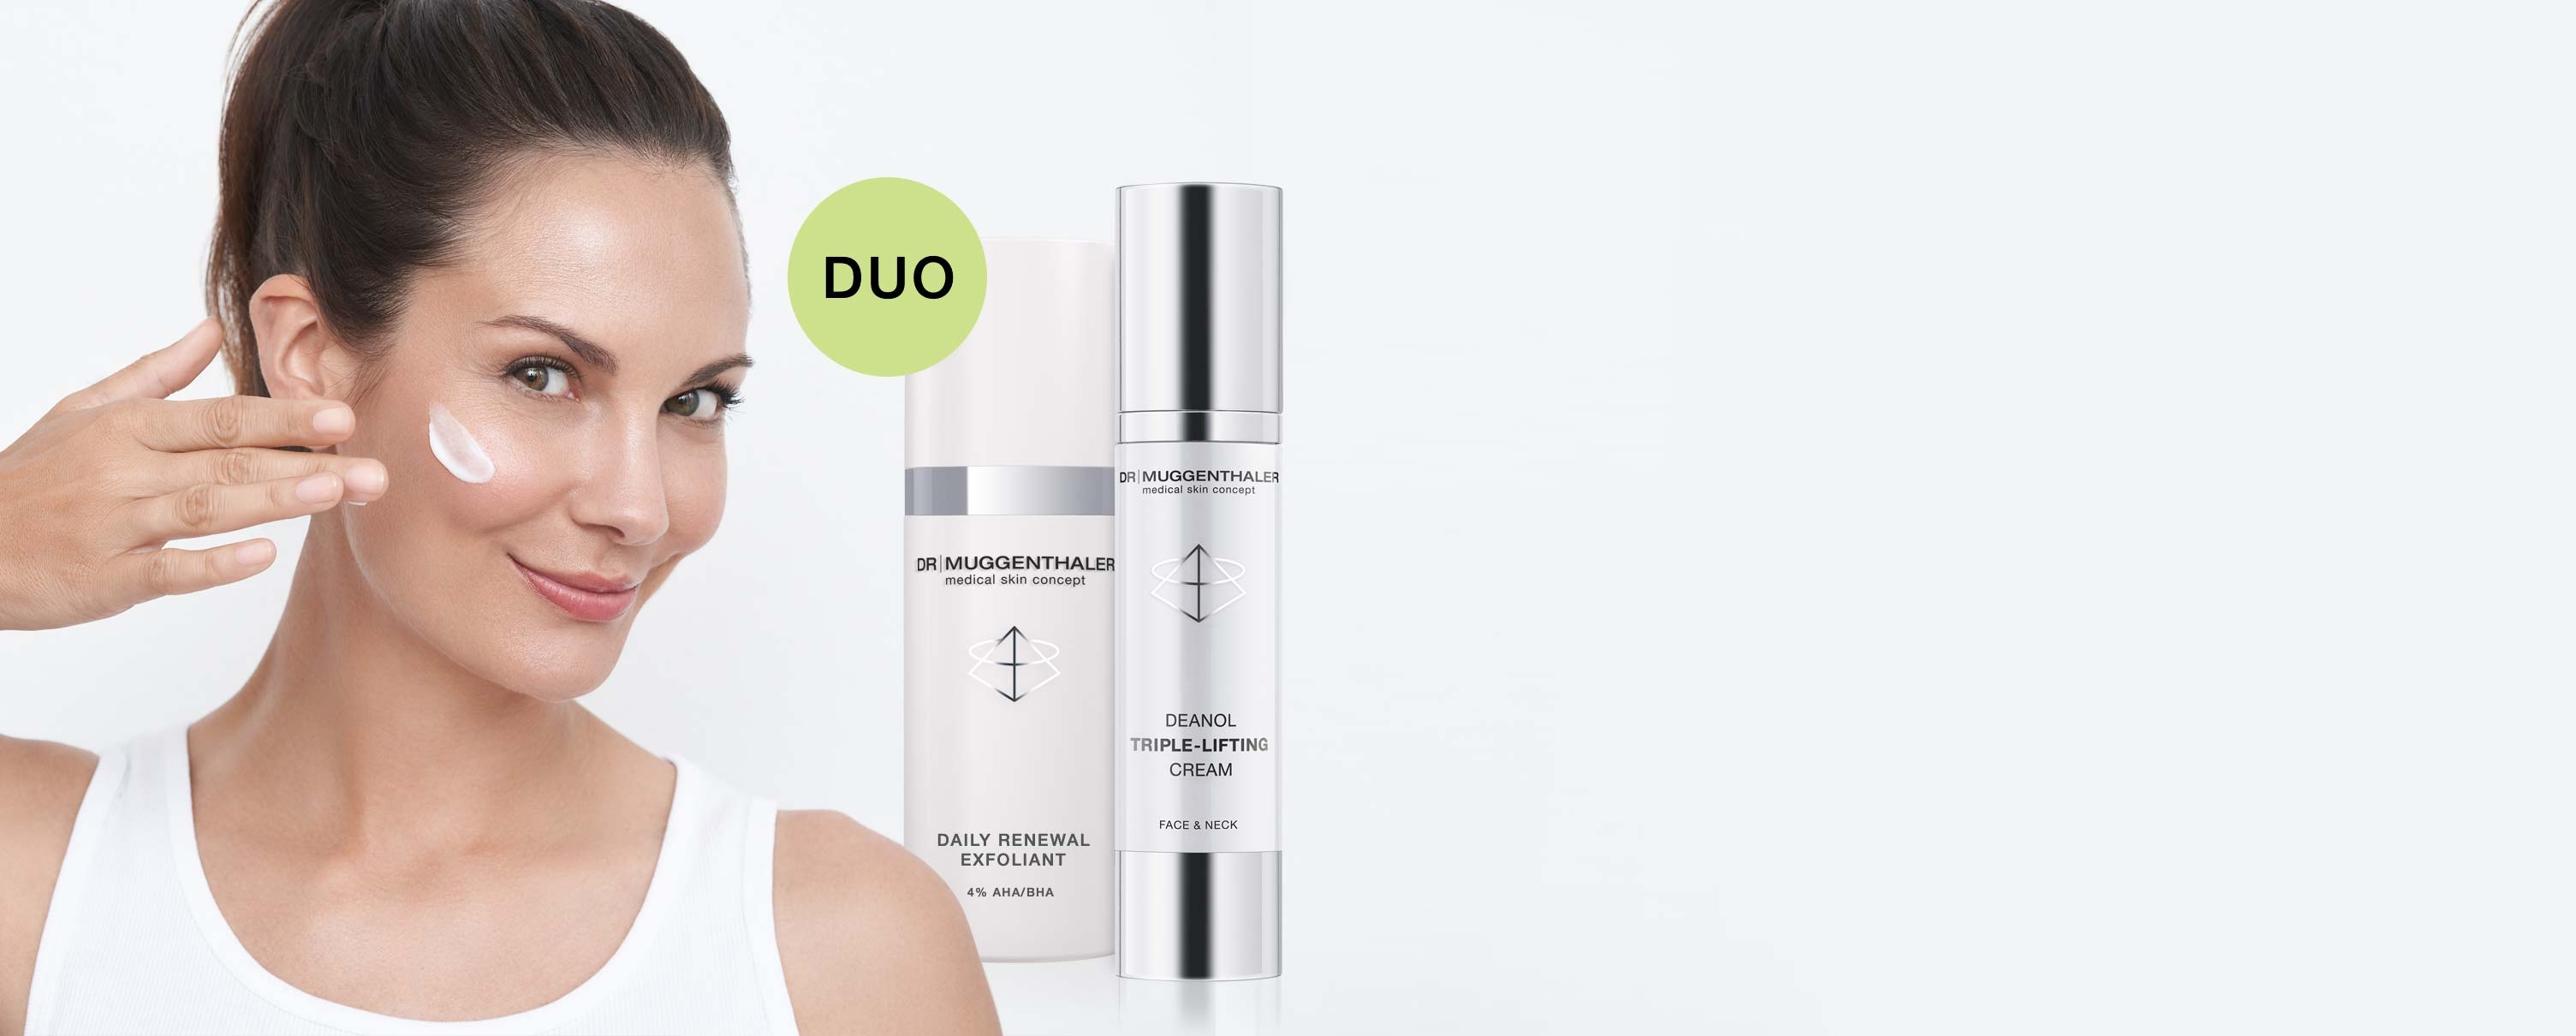 The duo for a radiant and firm skin